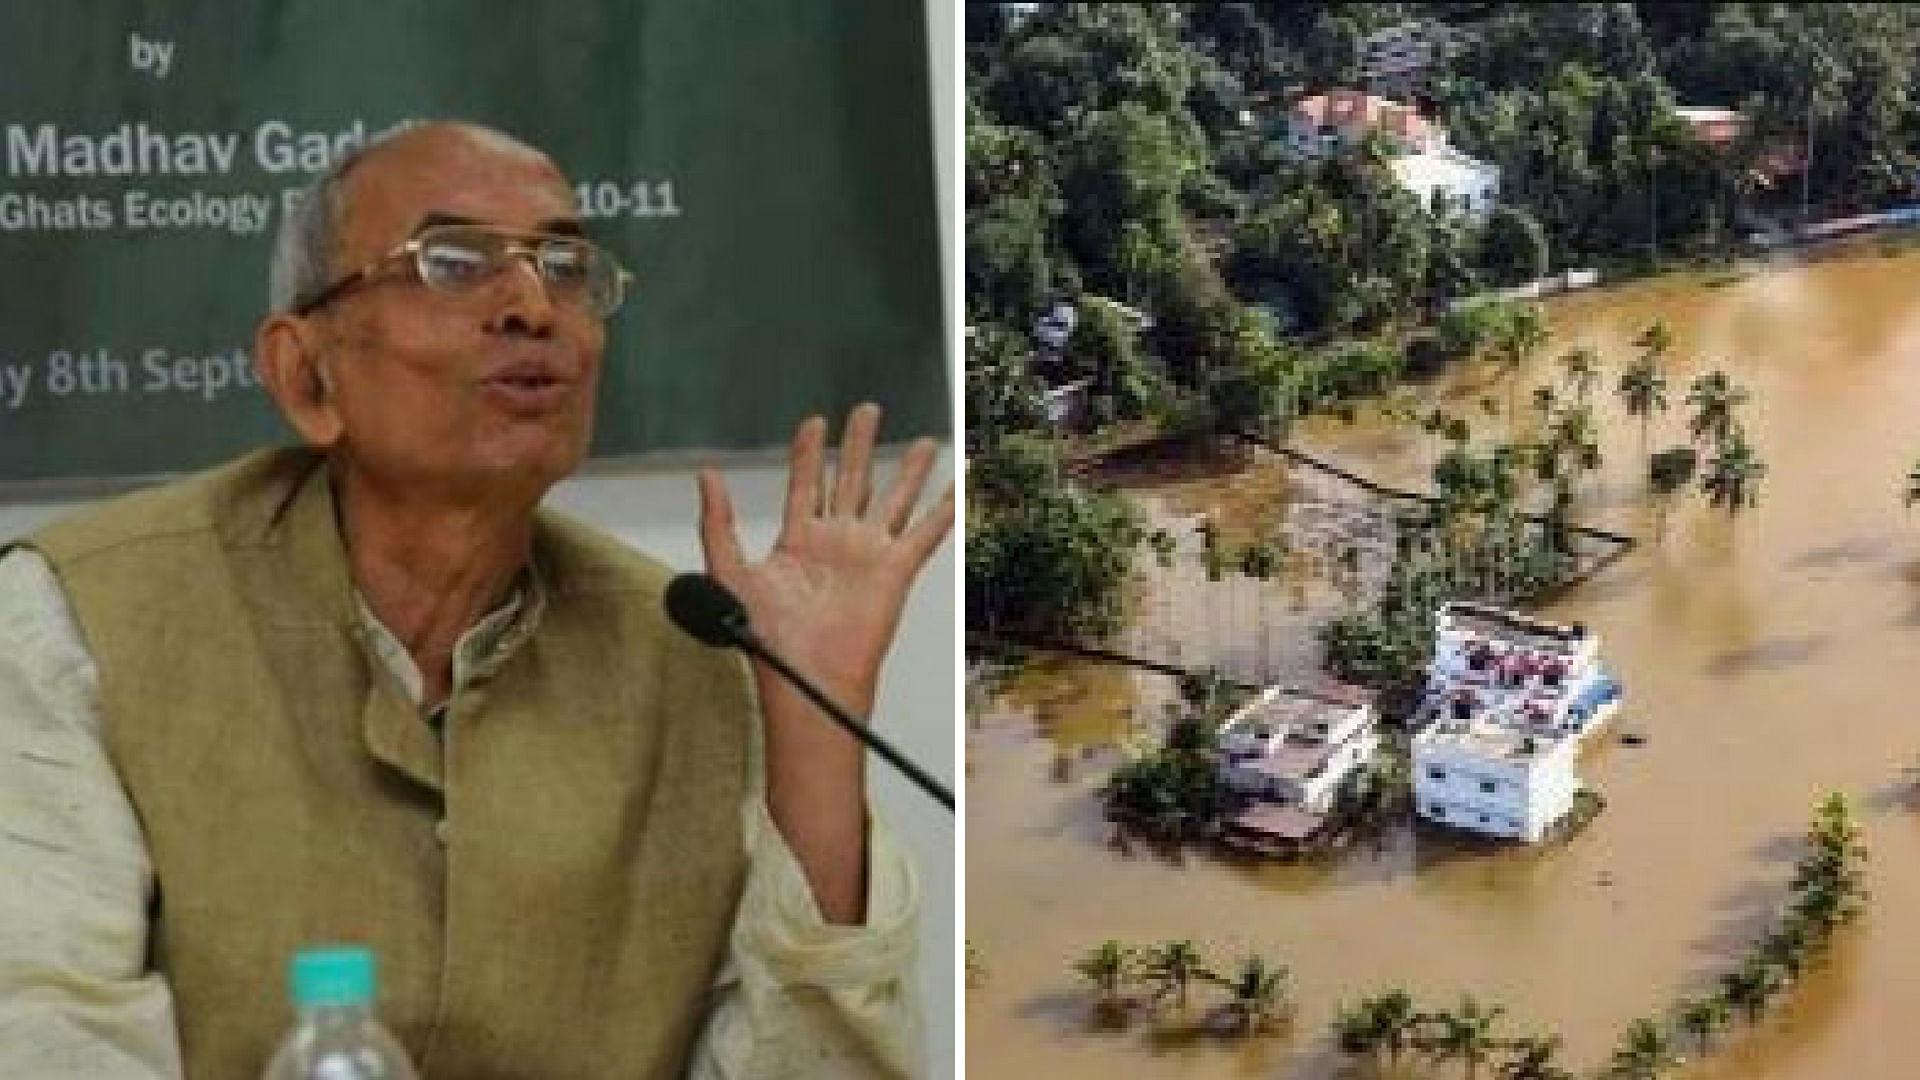 Ecologist Madhav Gadgil in his report had warned against the damage to the environment in Kerala.